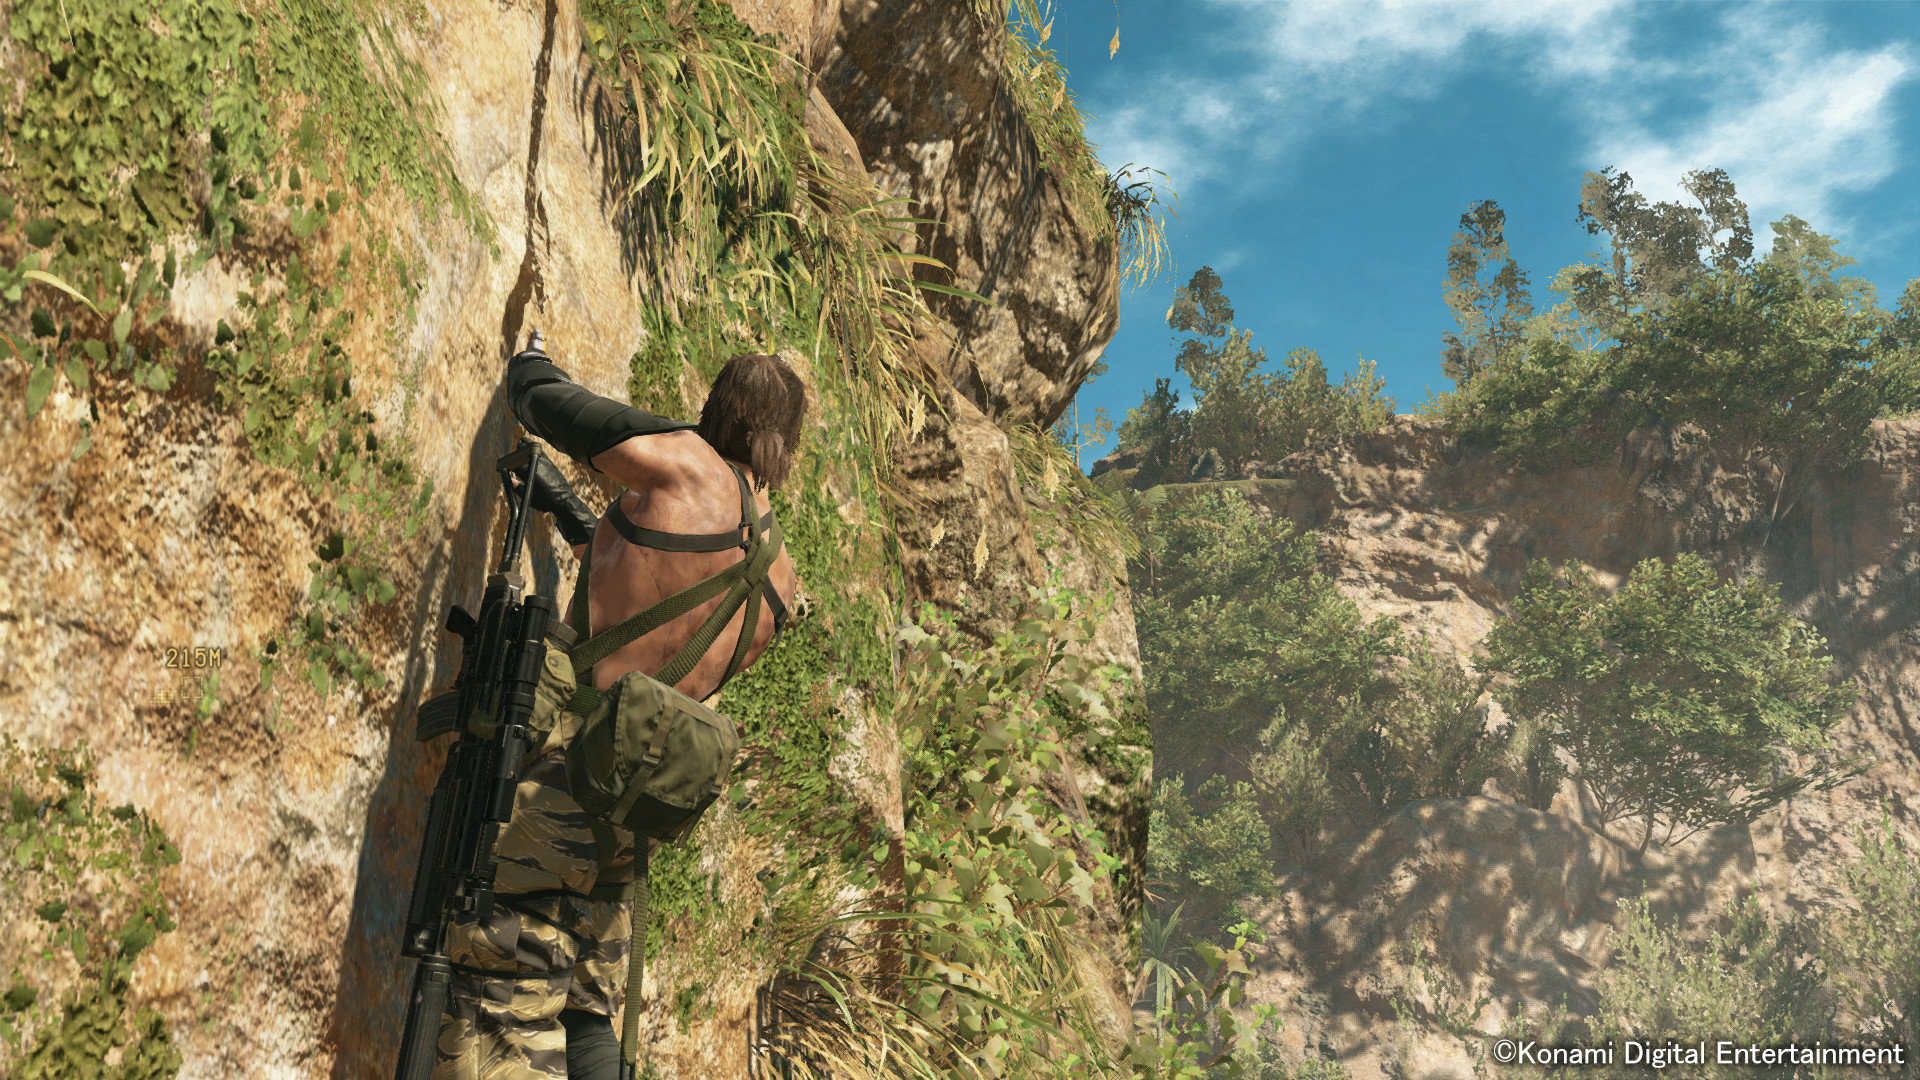 1920x1080 Metal Gear Solid 5: The Phantom Pain's System Requirements Revealed -  GameSpot